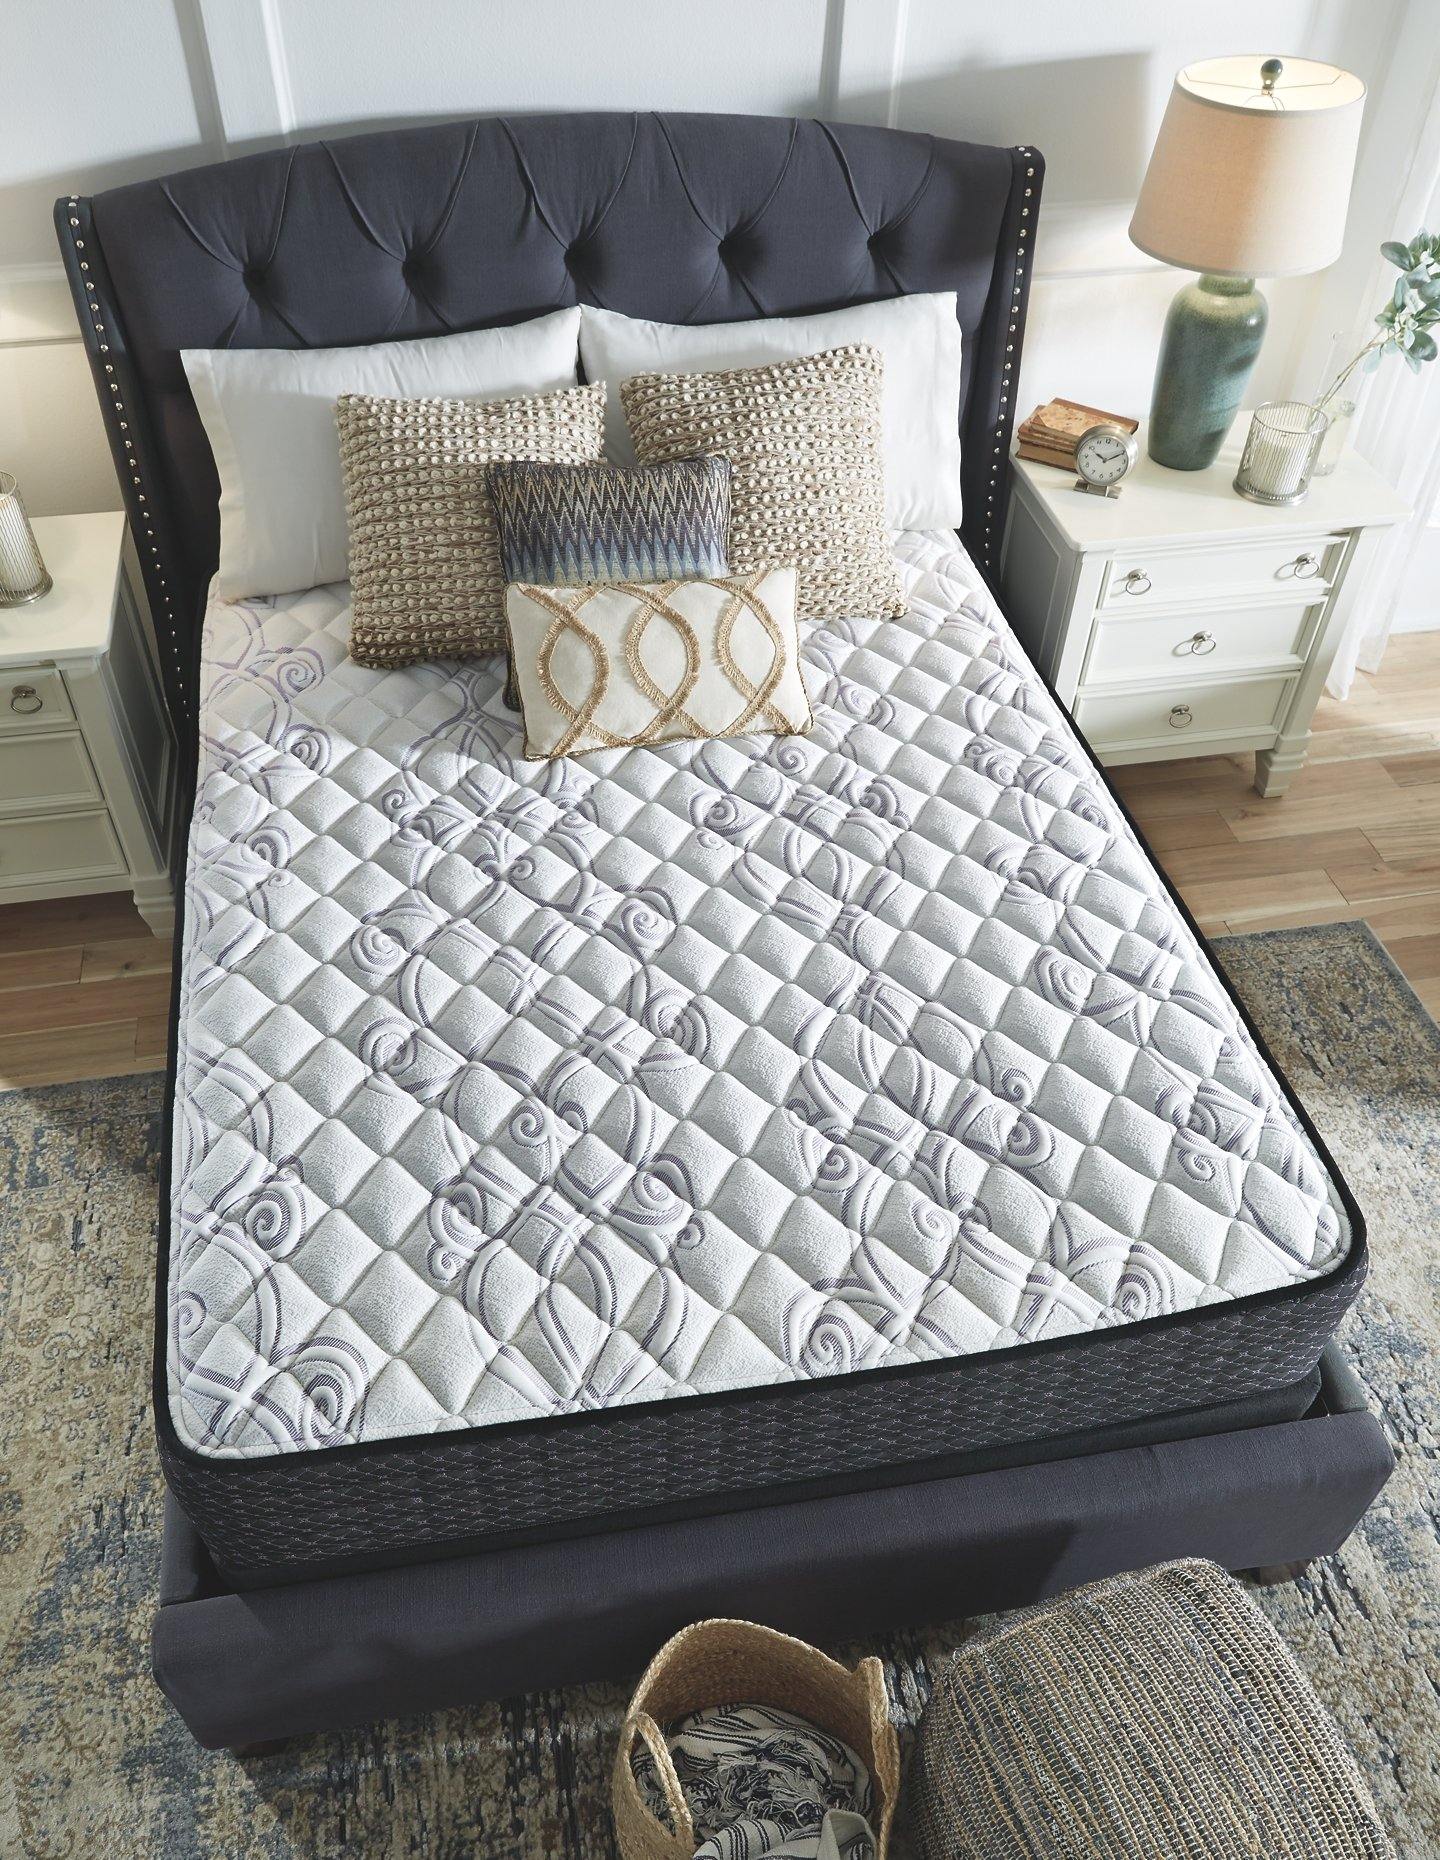 Limited Edition Firm Queen Mattress M62531 Inner Spring Master Mattresses By ashley - sofafair.com